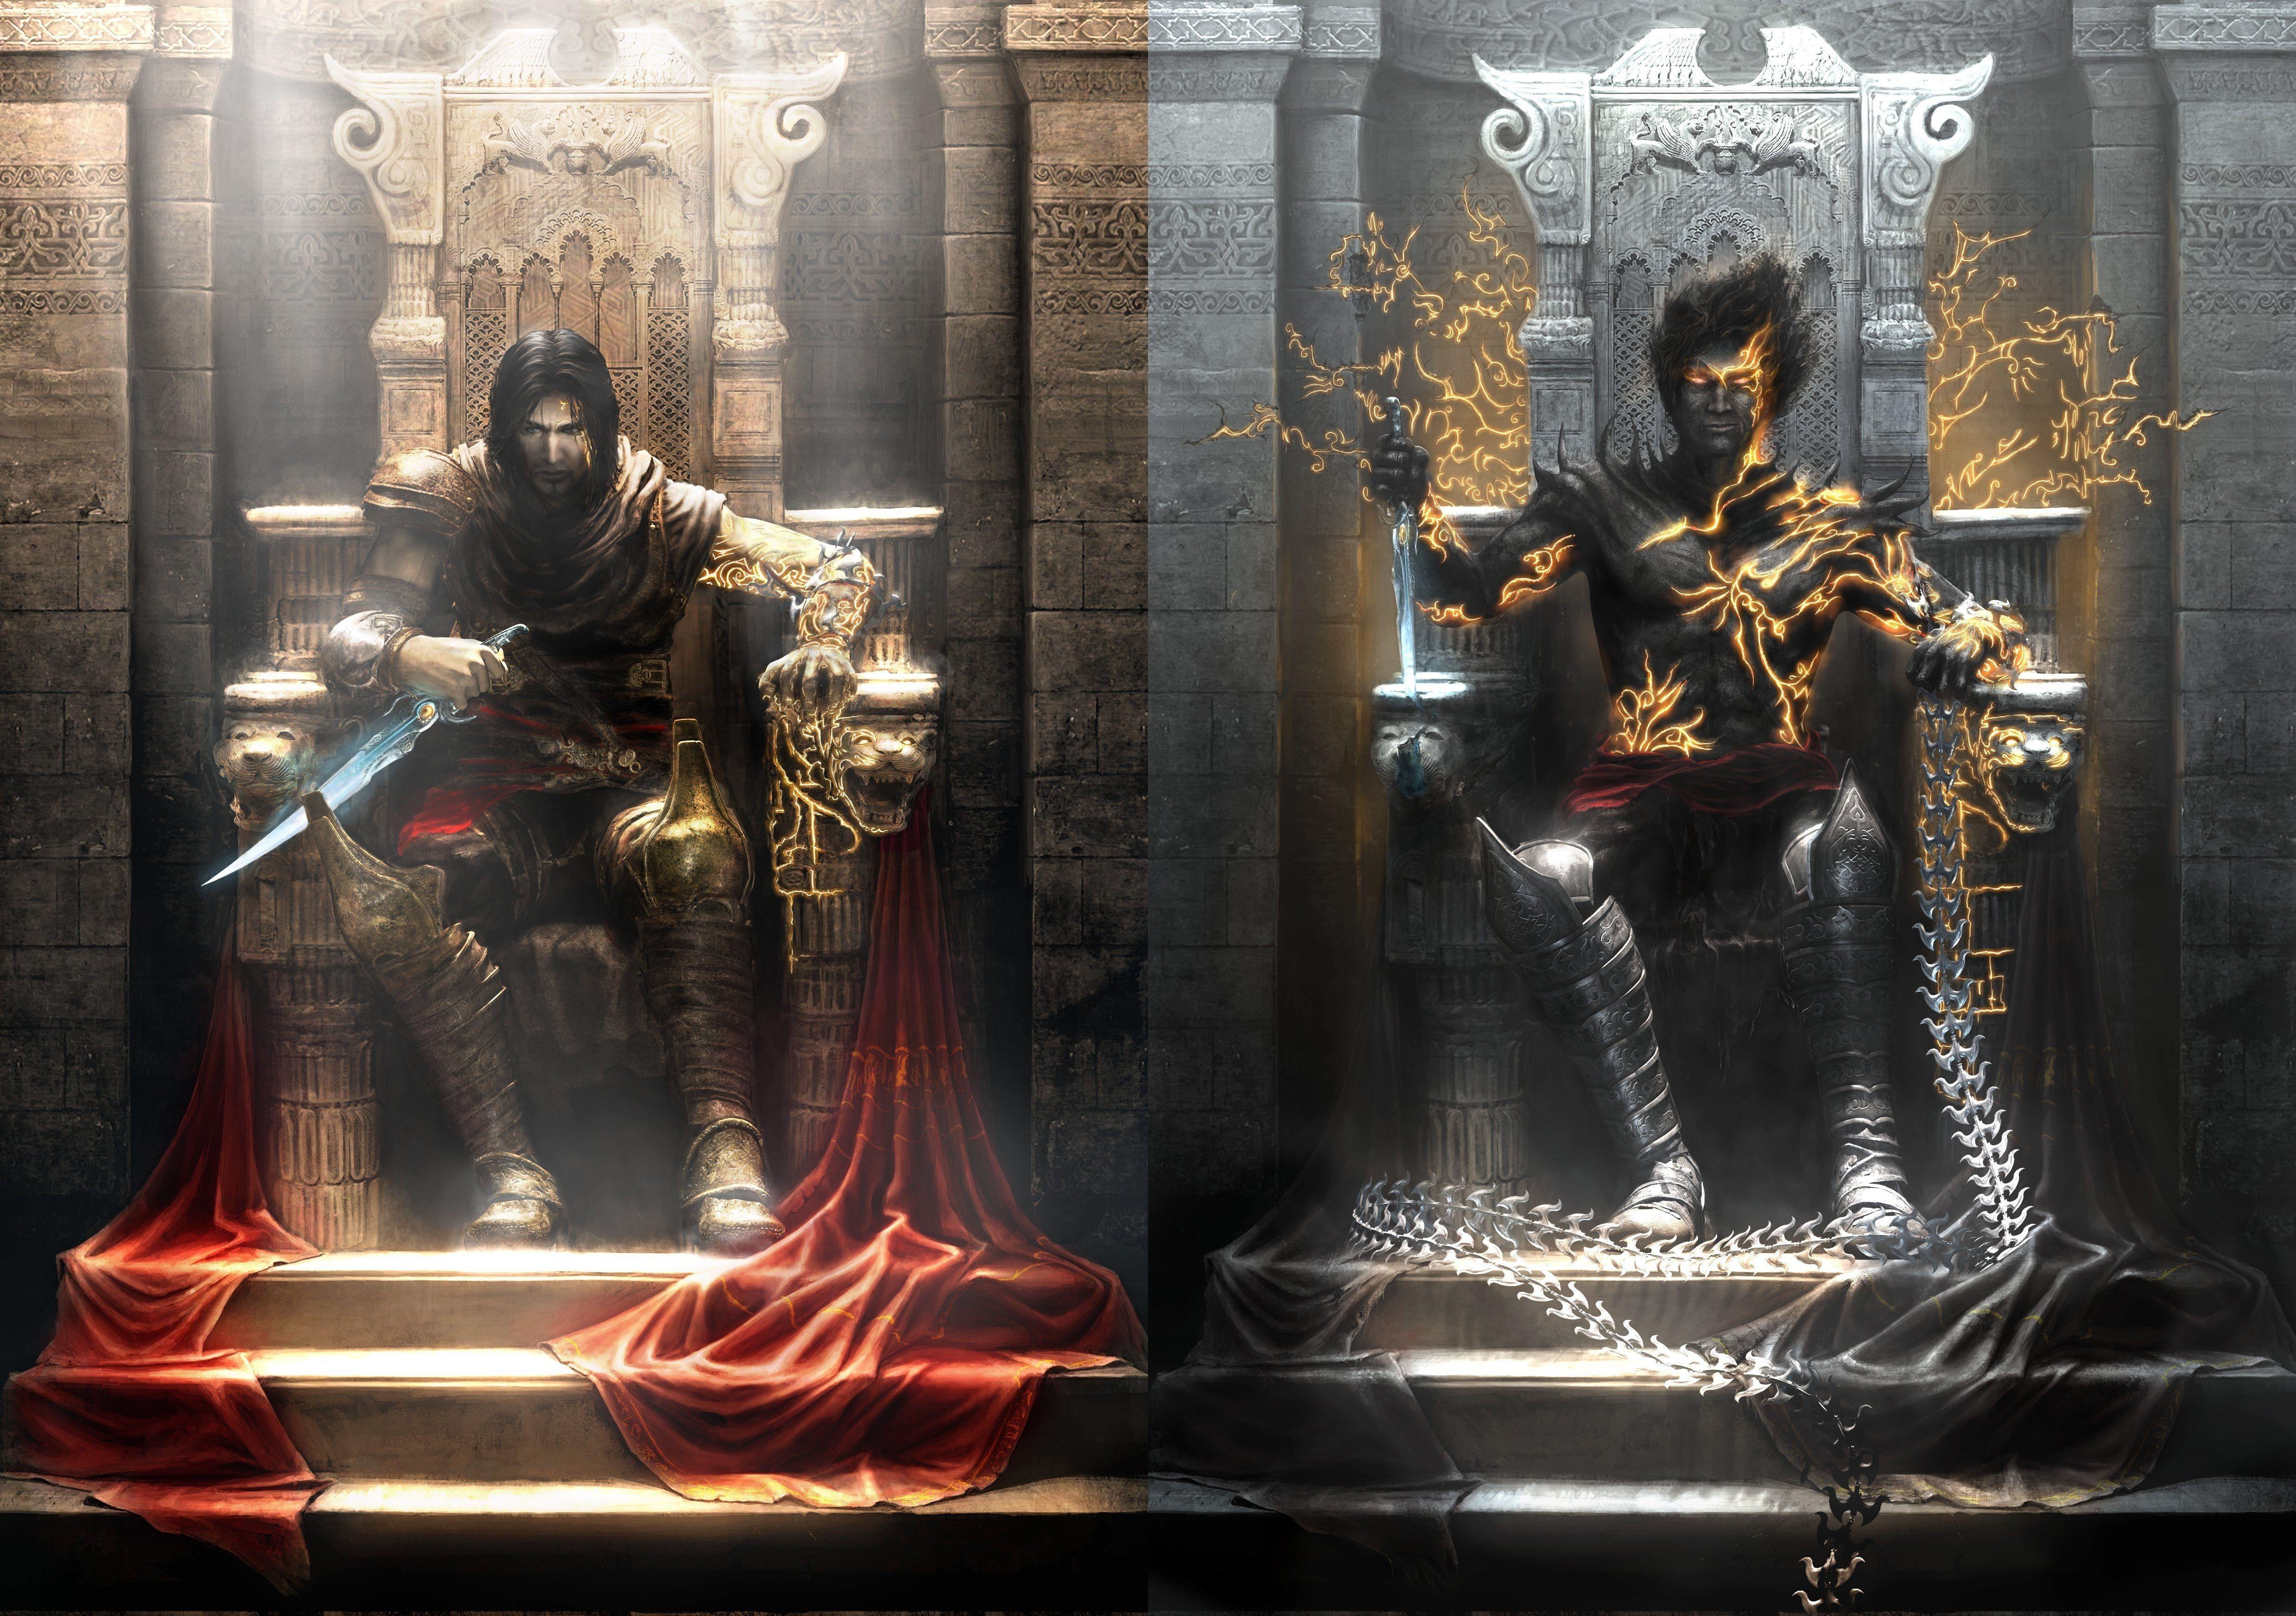 Prince Of Persia: The Two Thrones HD Wallpaper. Background